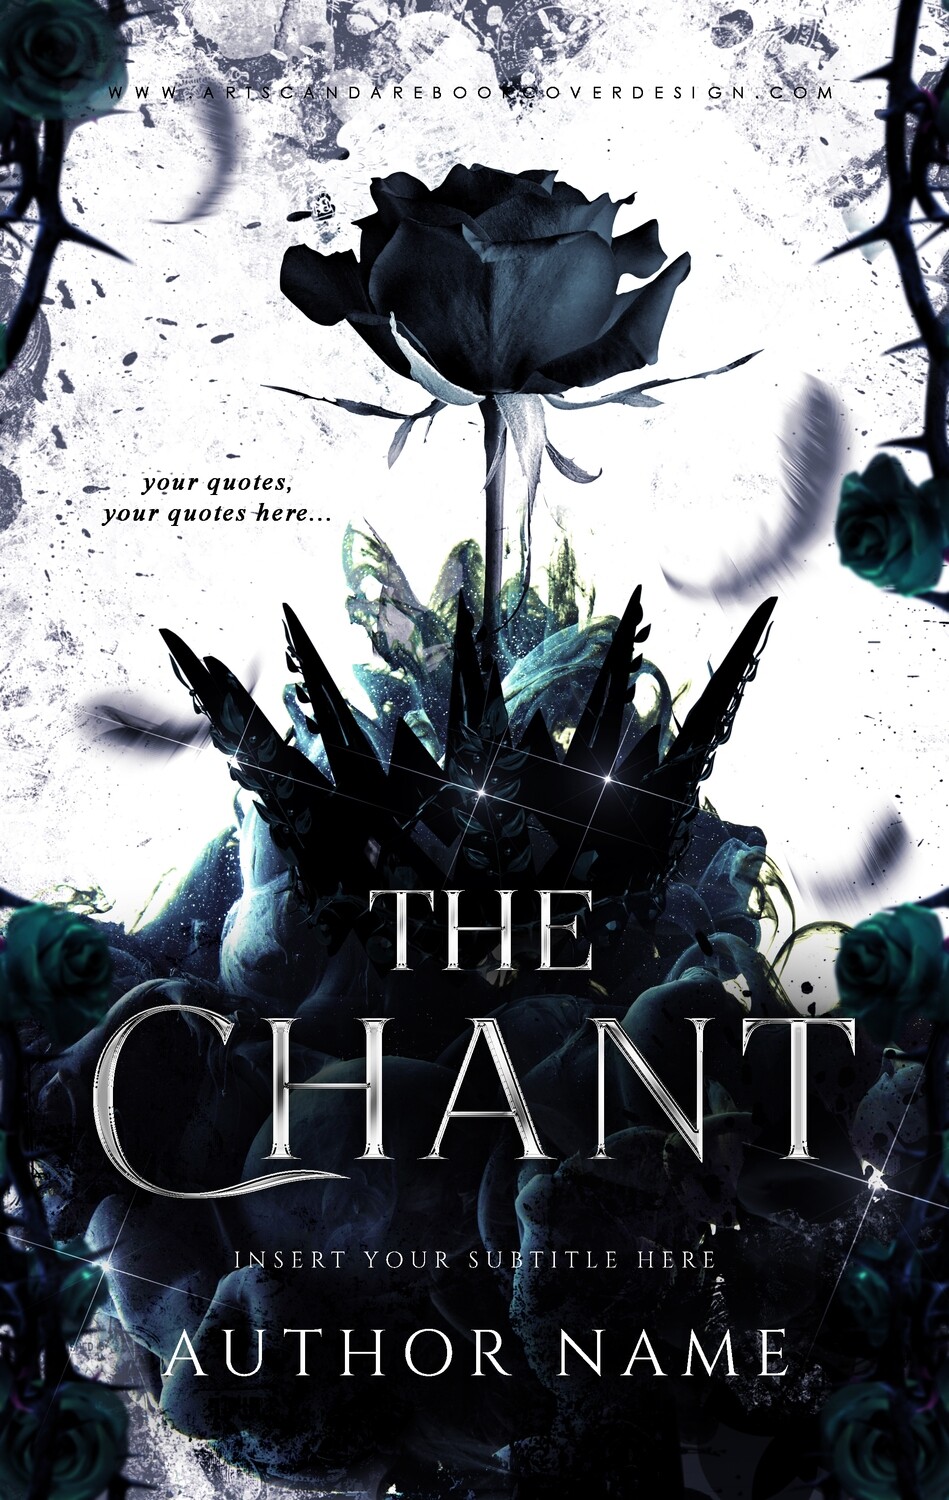 Ebook: The Chant